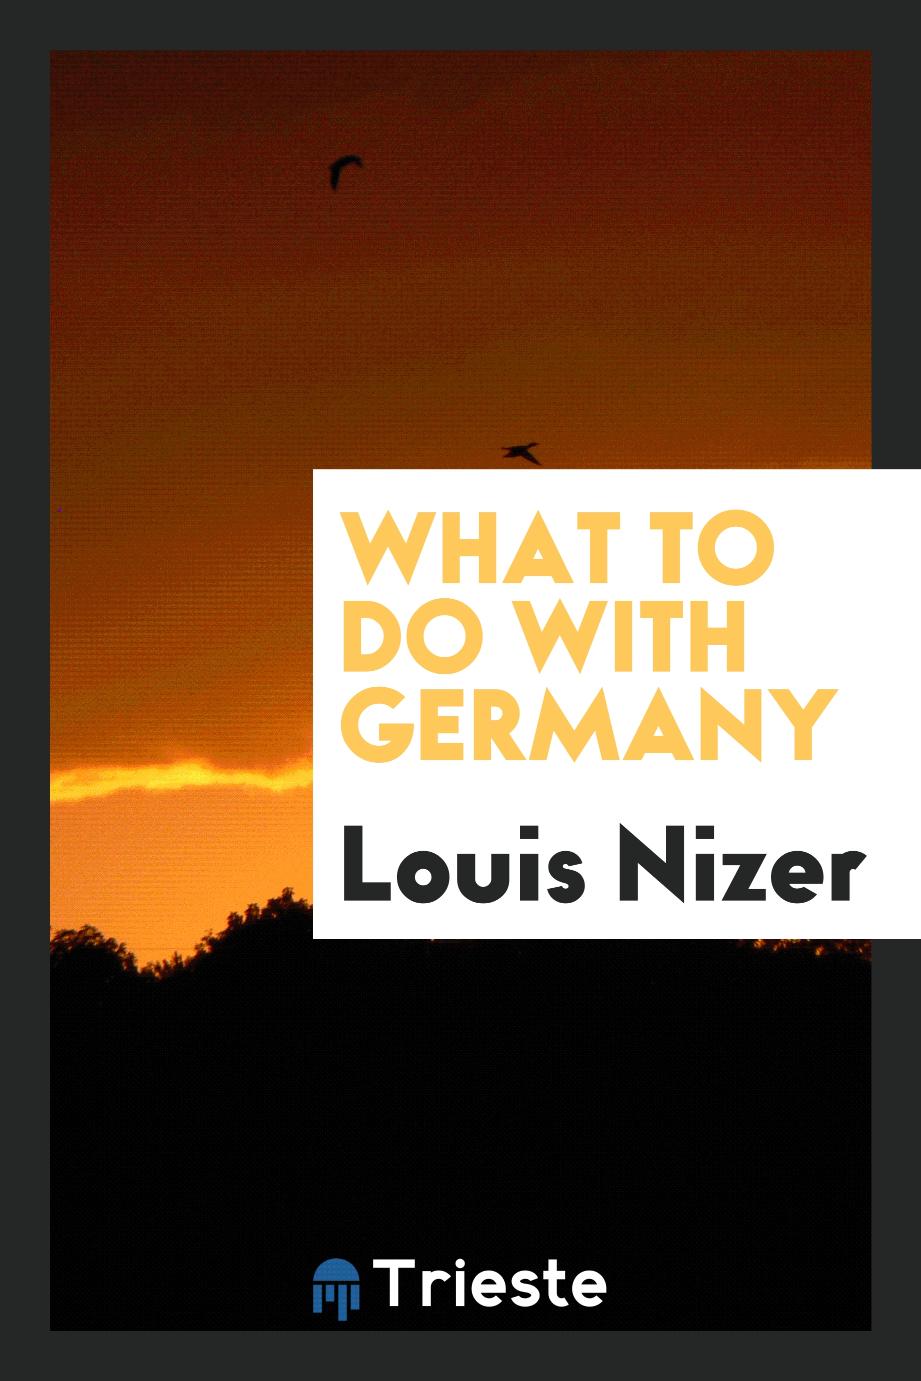 What to do with Germany